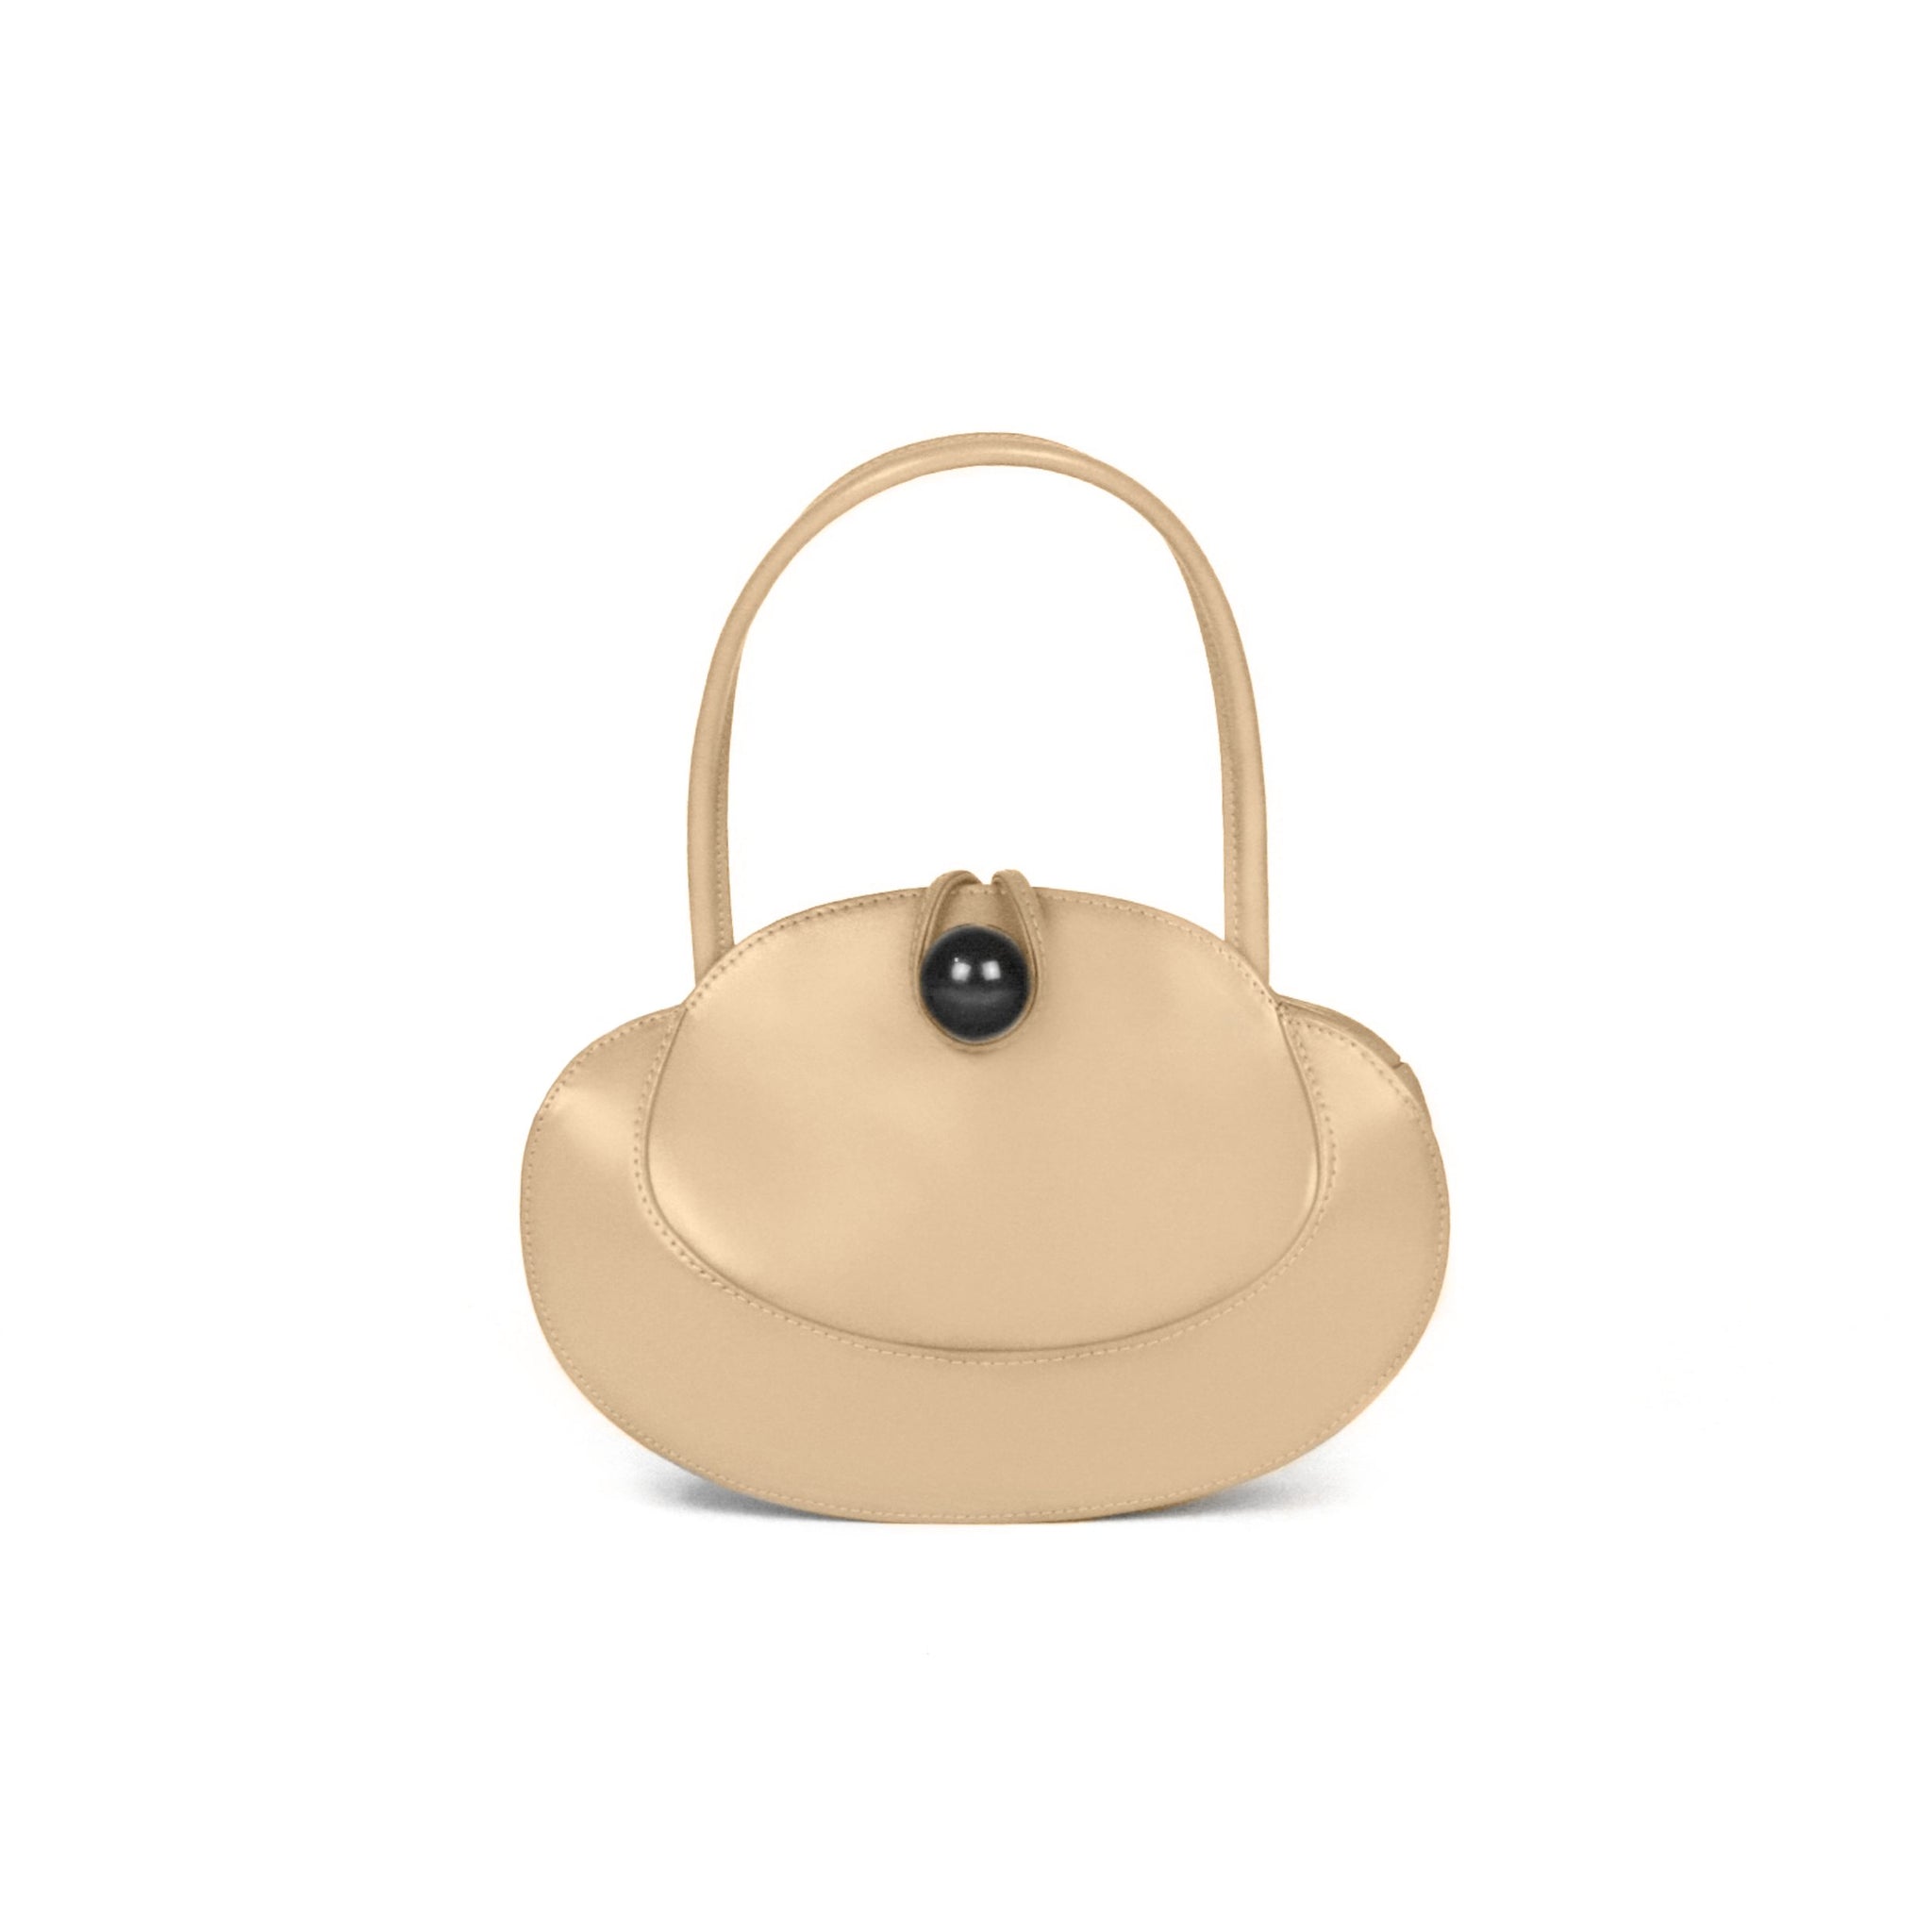 Luxurious smal leather bag, from collection in Paris – Obilis Paris